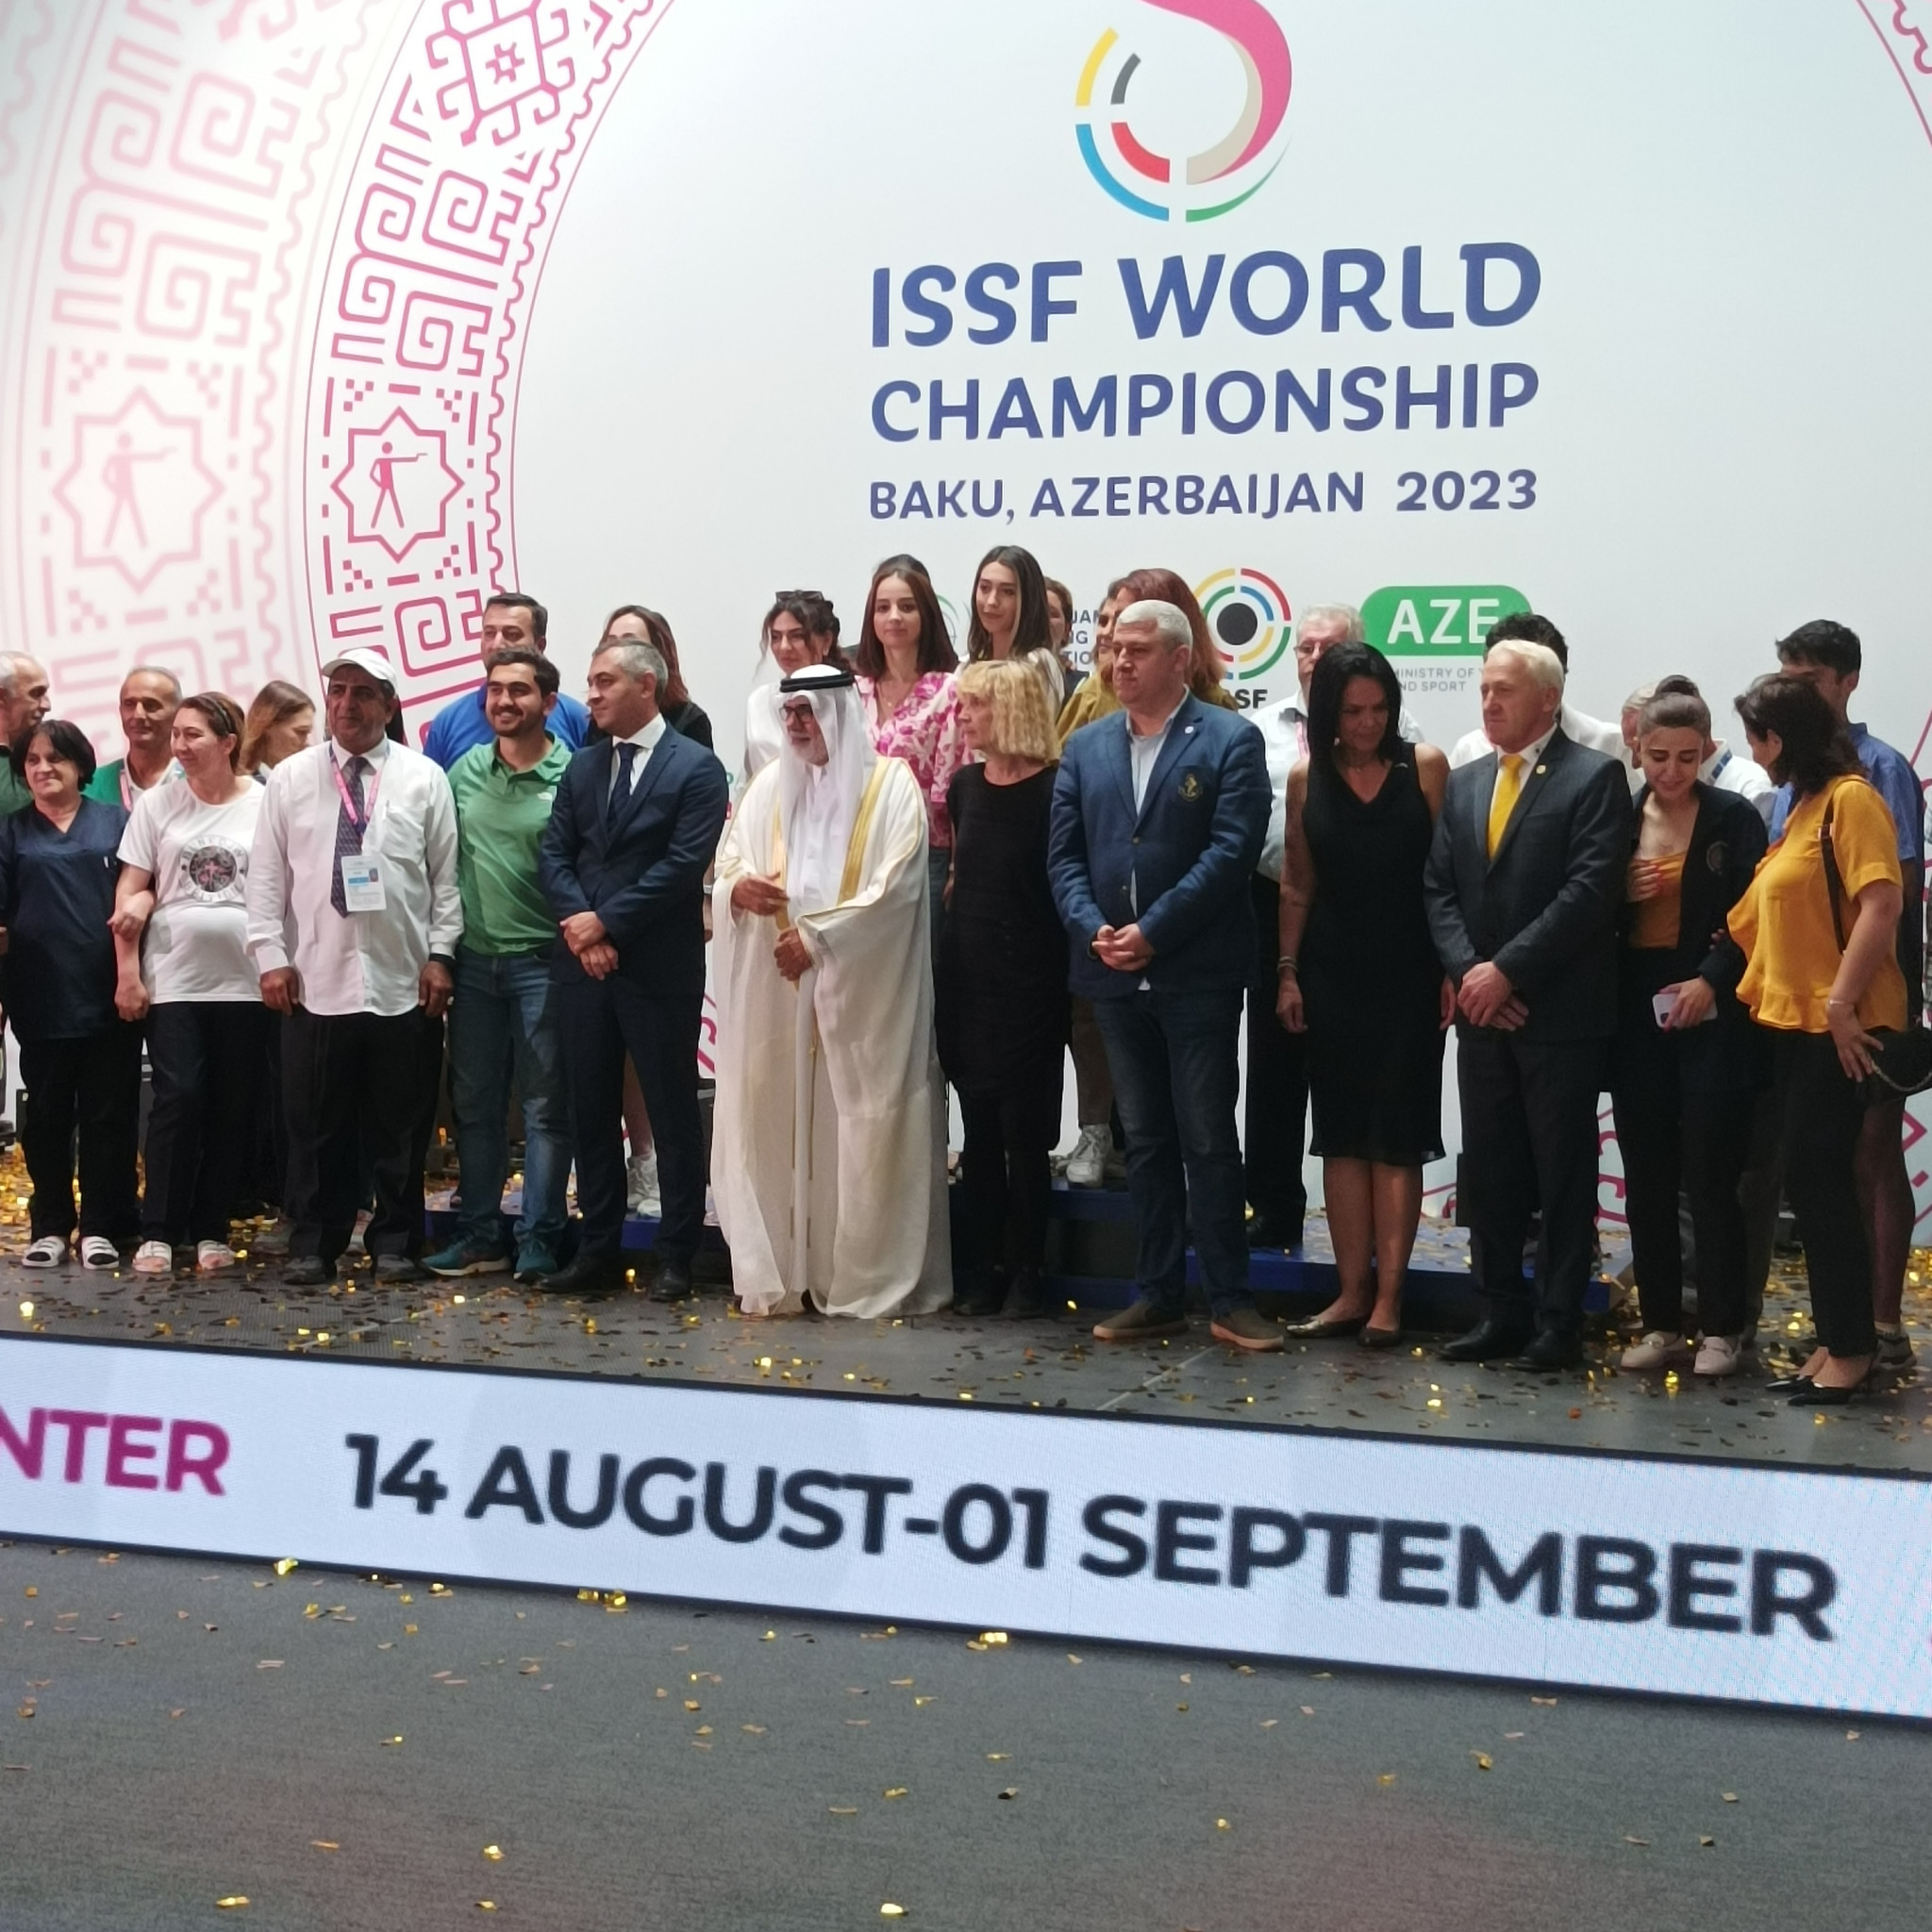 Nyberg wins last gold medal of ISSF World Championships in Baku